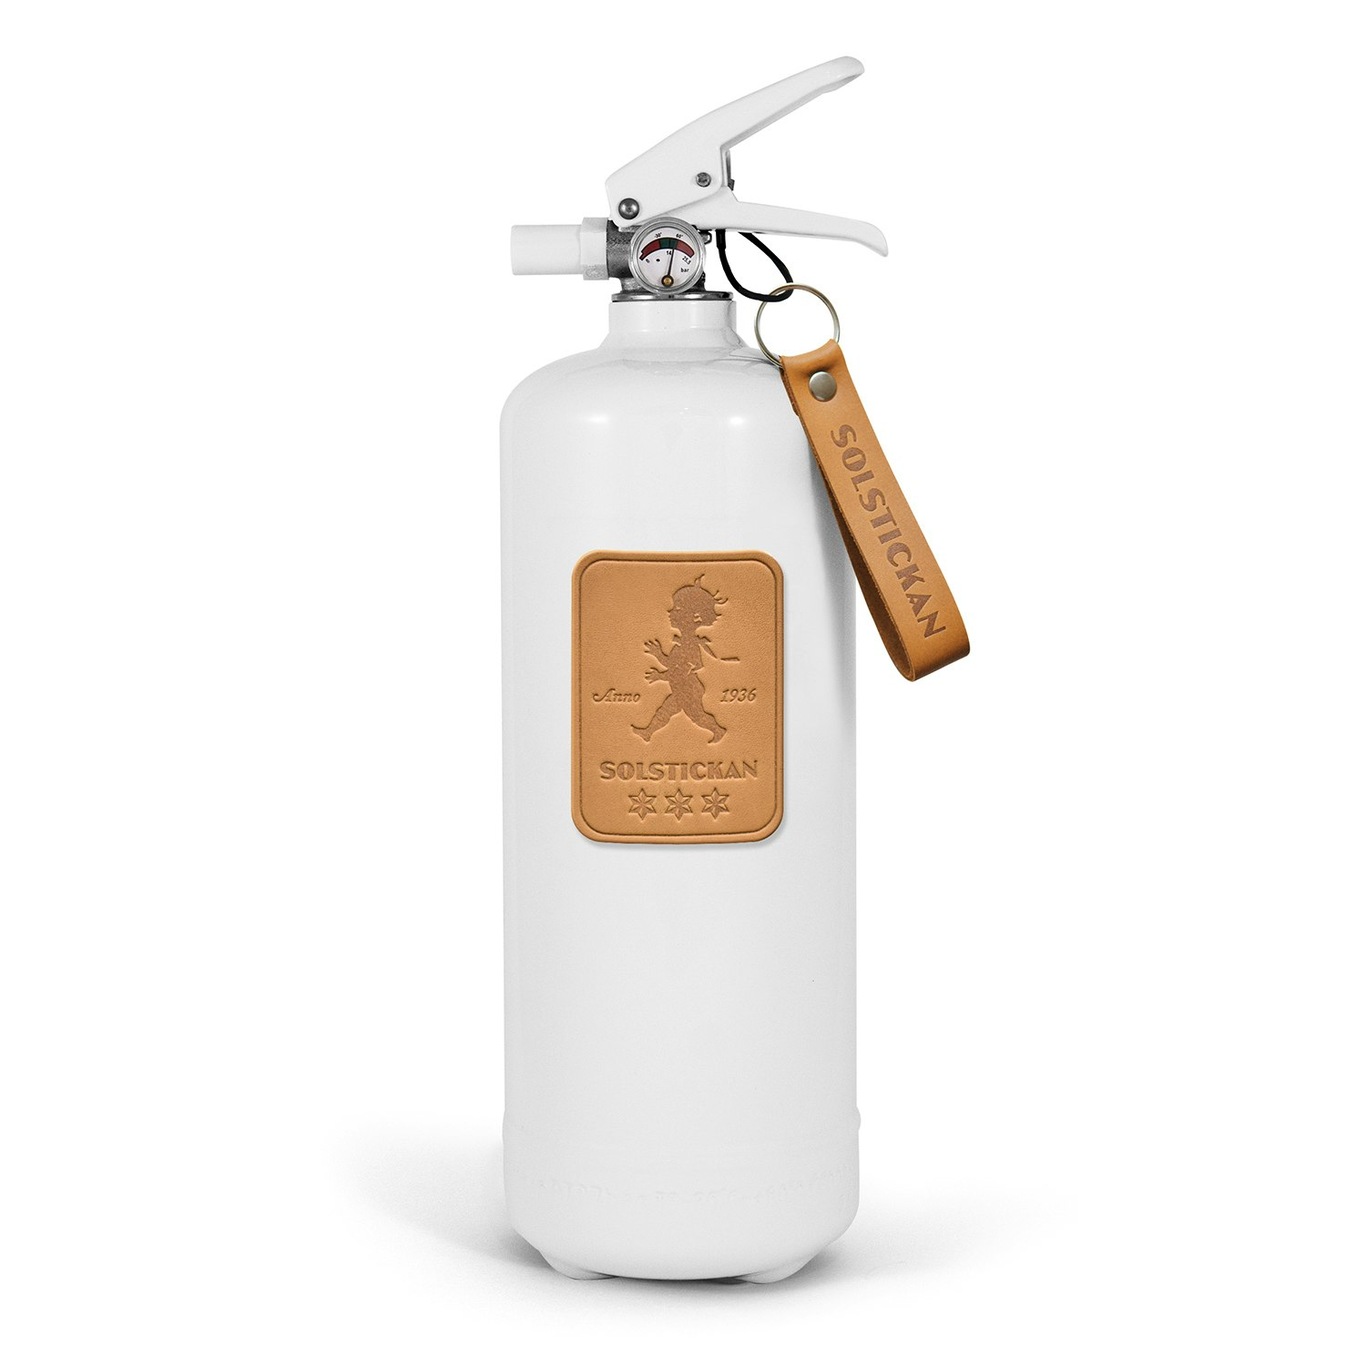 Solstickan Fire Extinguisher 2 kg, Leather Edition/Light Brown